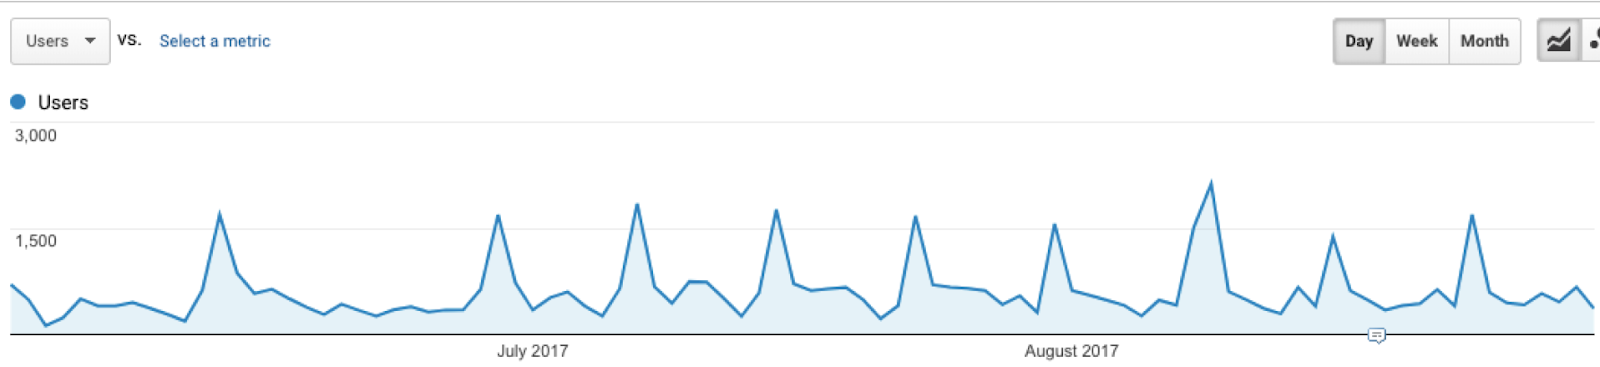 Website traffic timeline with spam spikes